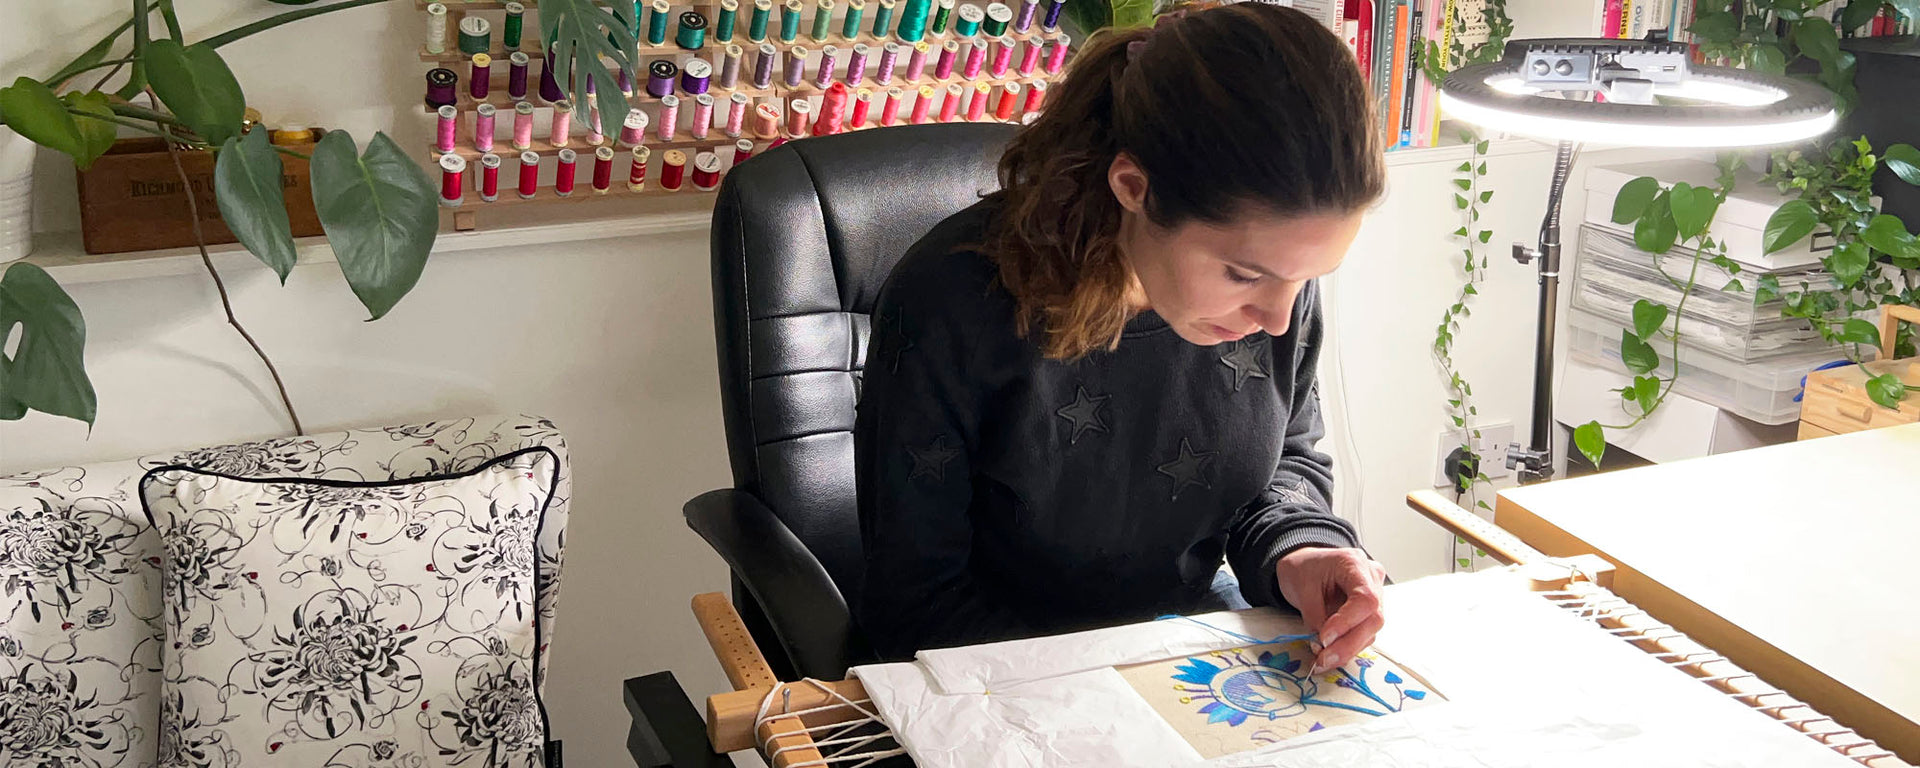 Susannah hand embroidering in her studio